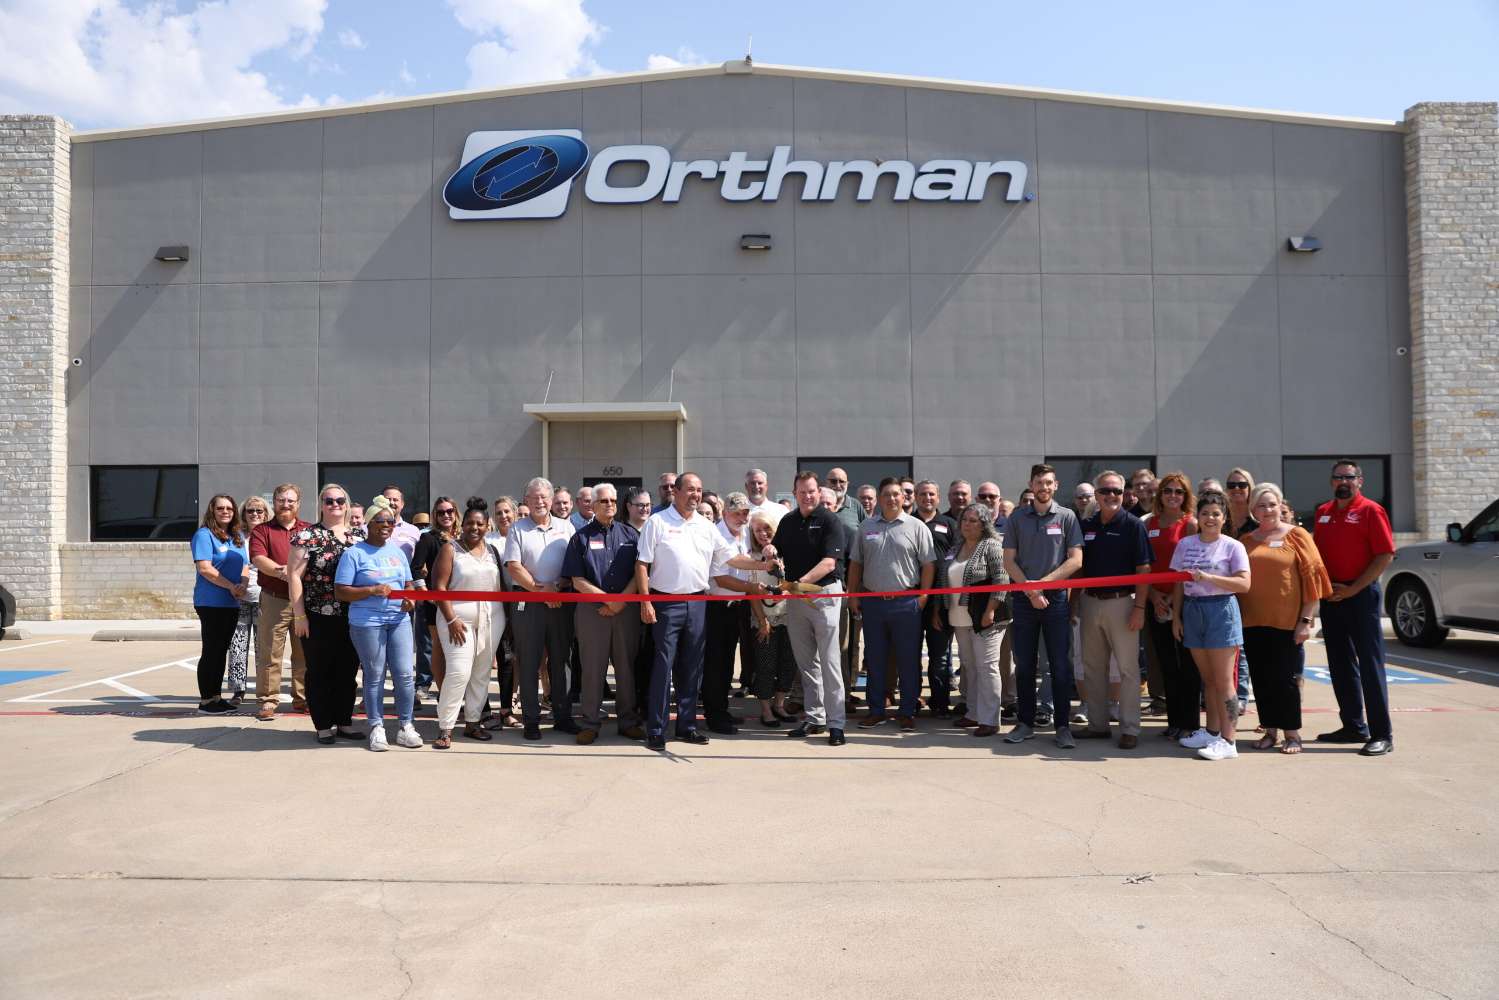 Orthman Conveying Systems (OCS) started in 2003 in Lexington, NE as a bolt on company to Orthman Manufacturing Inc